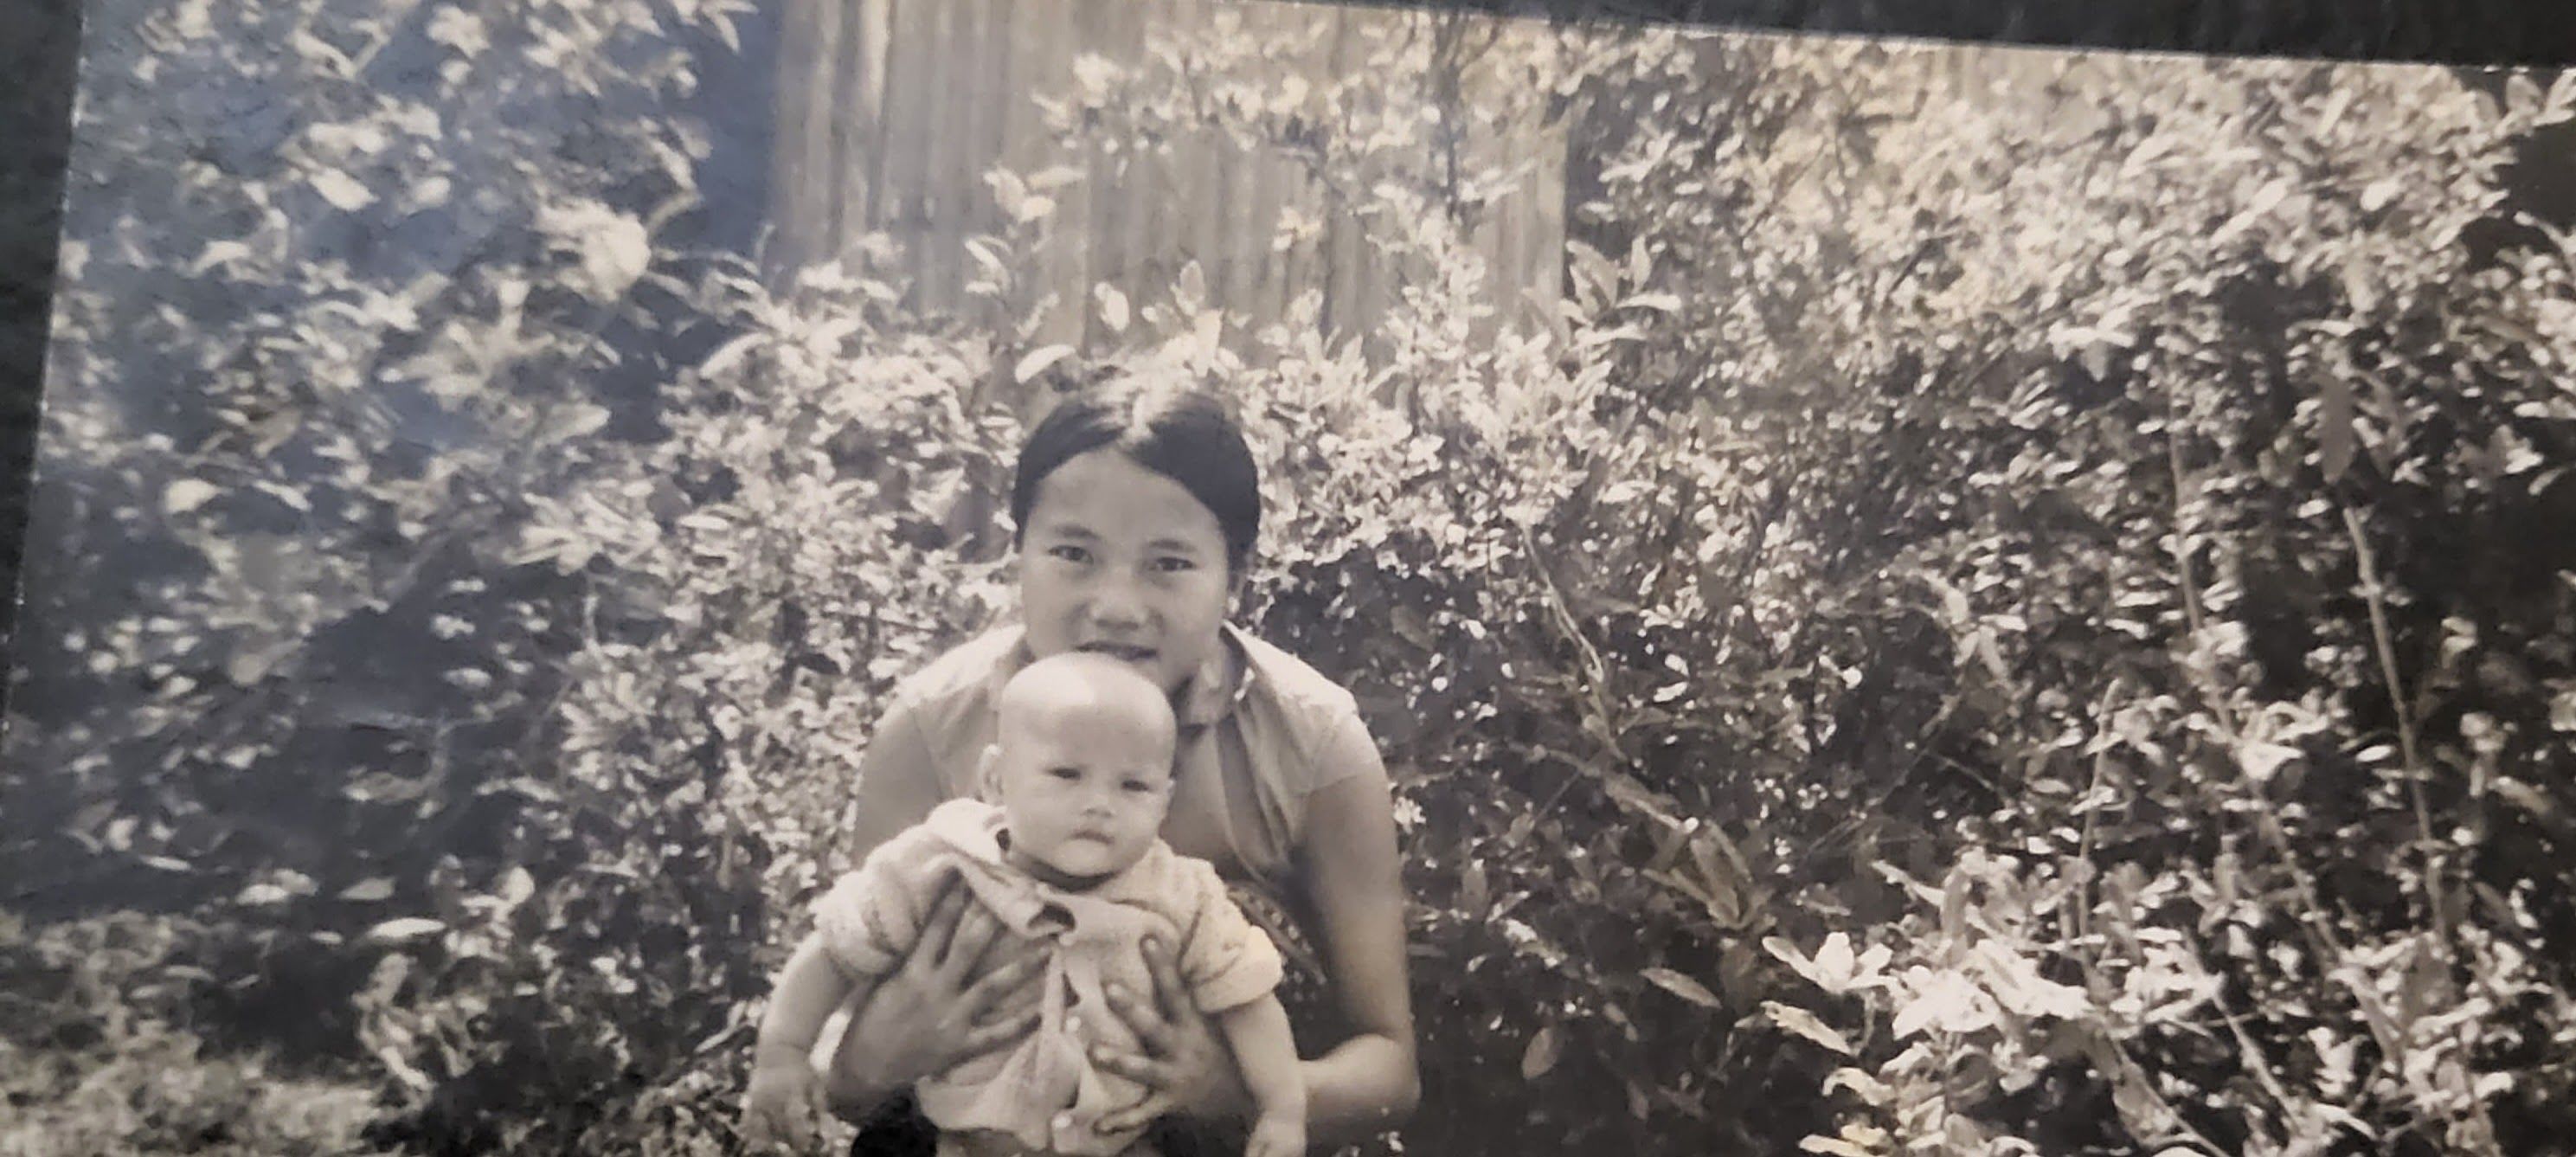 An old black and white photo shows a baby and her mother in front of some greenery.